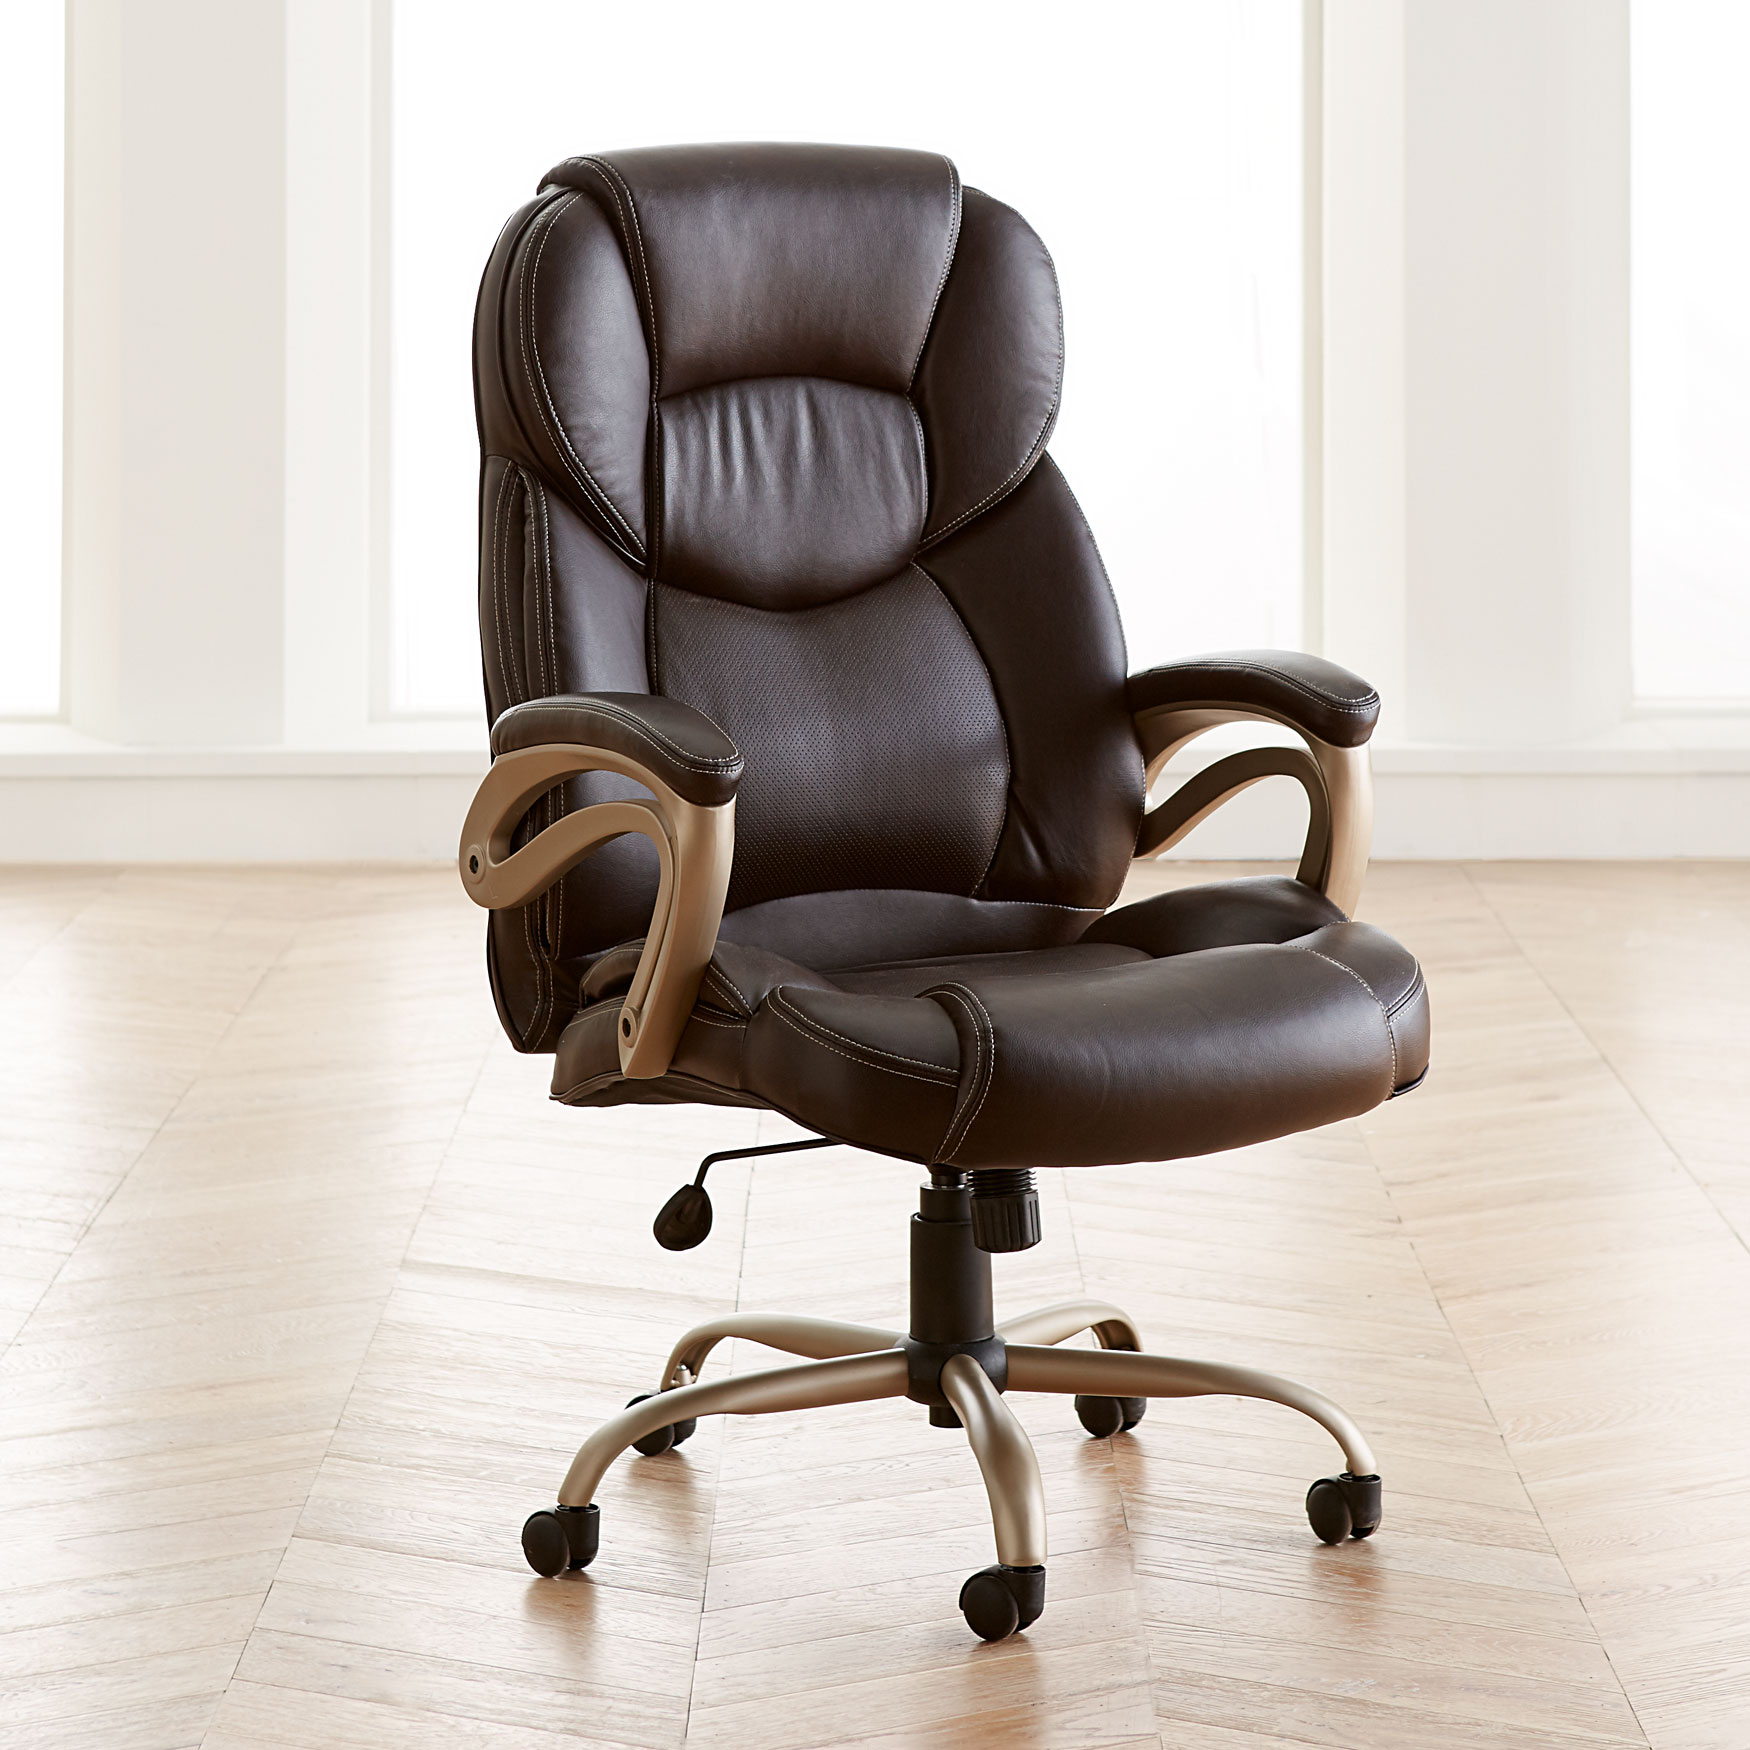 Extra Wide Memory Foam Office Chair| Chairs & Recliners | Brylane Home